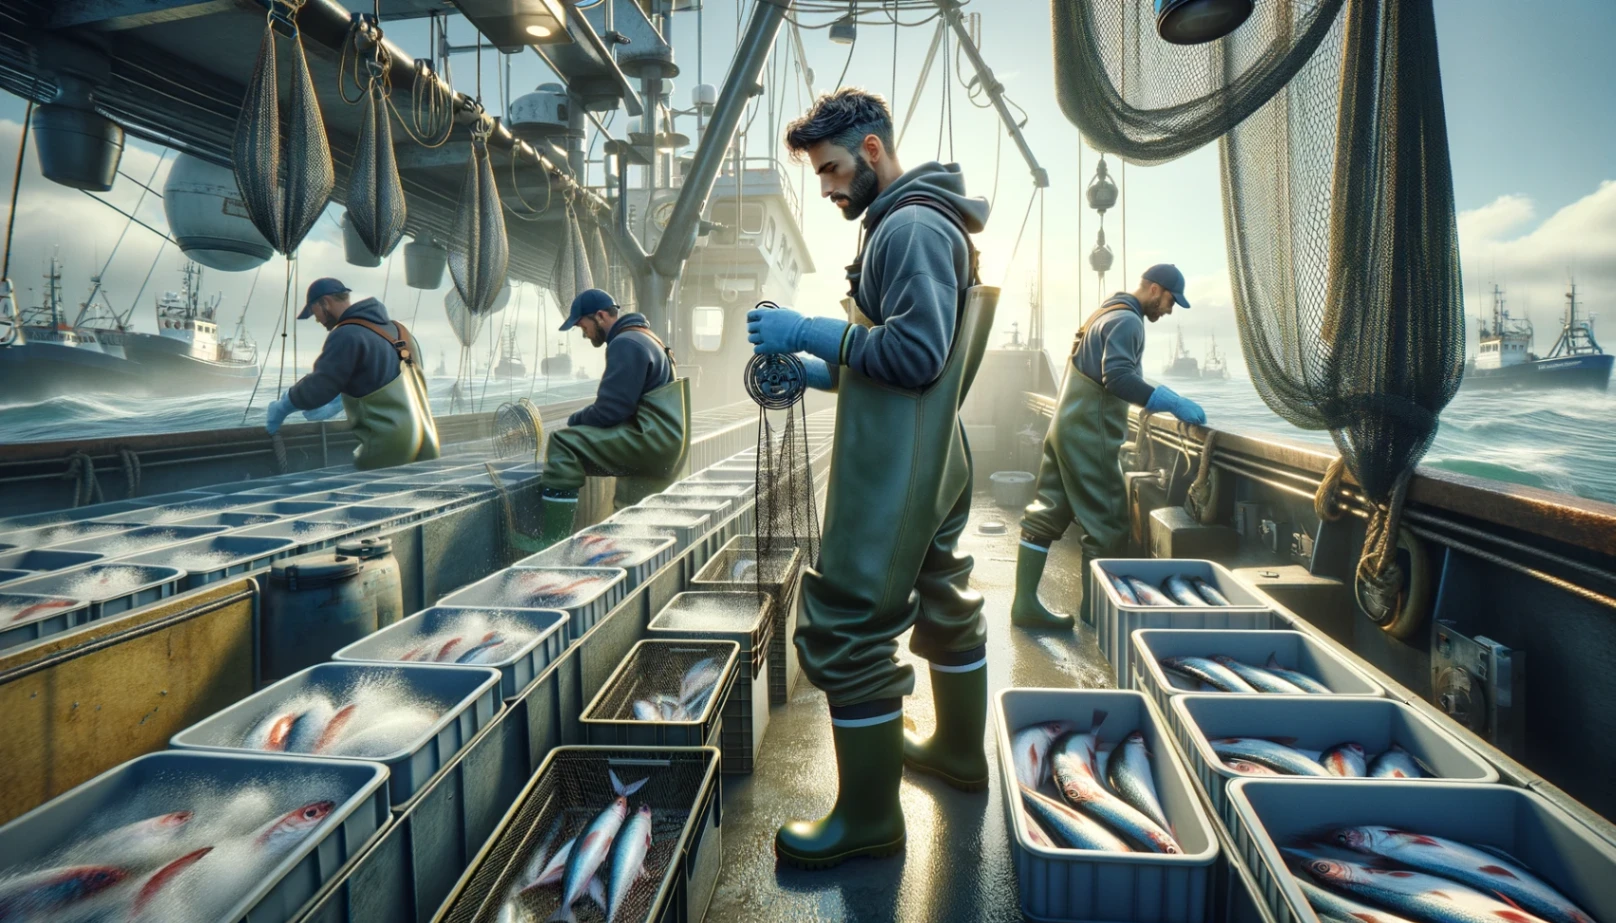 Commercial Fishing Jobs: $15-$25/Hr, Open to All Skills